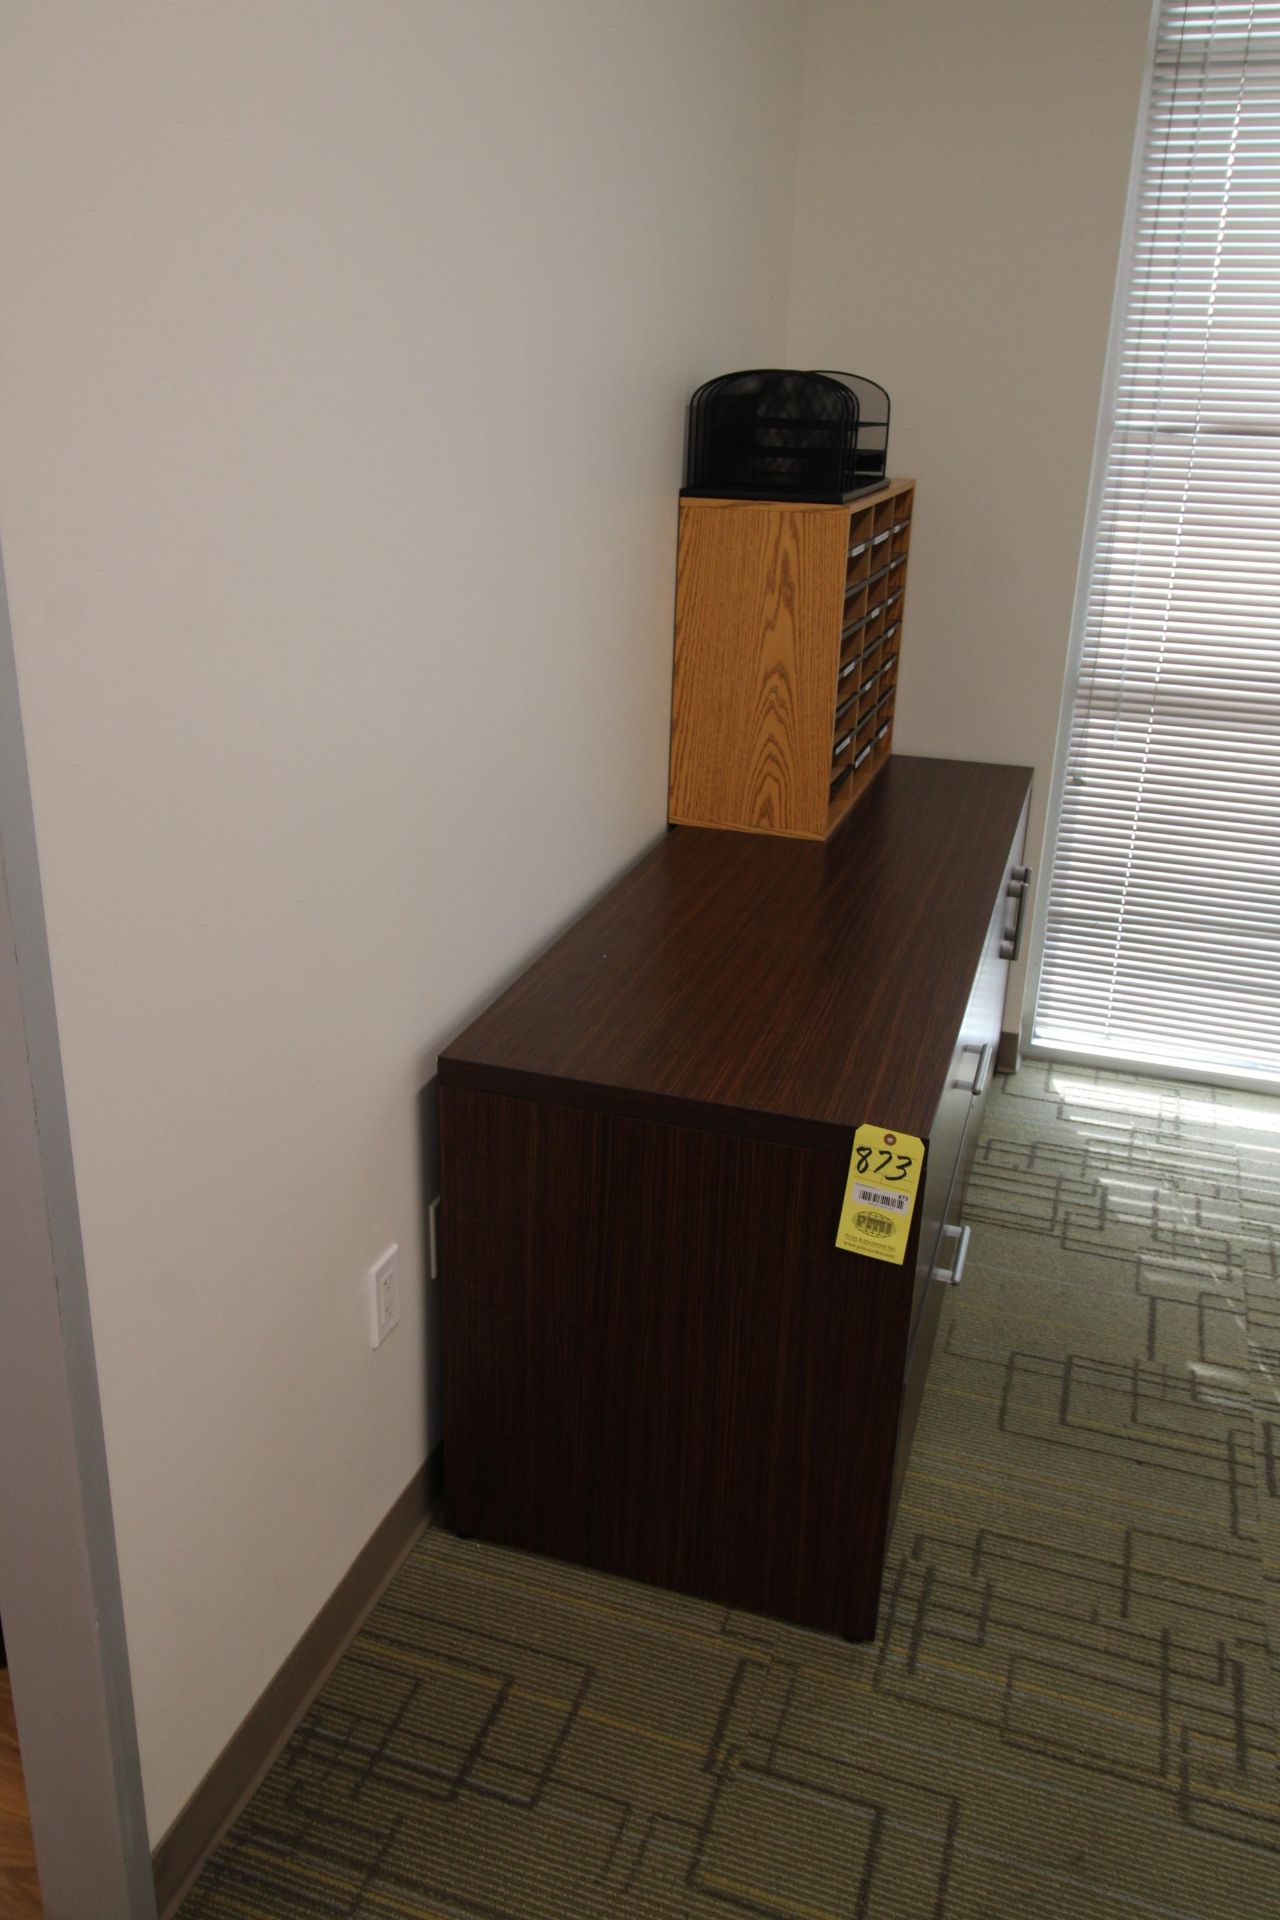 CREDENZA, 24" deep x 72" wide x 28" tall - Image 2 of 2